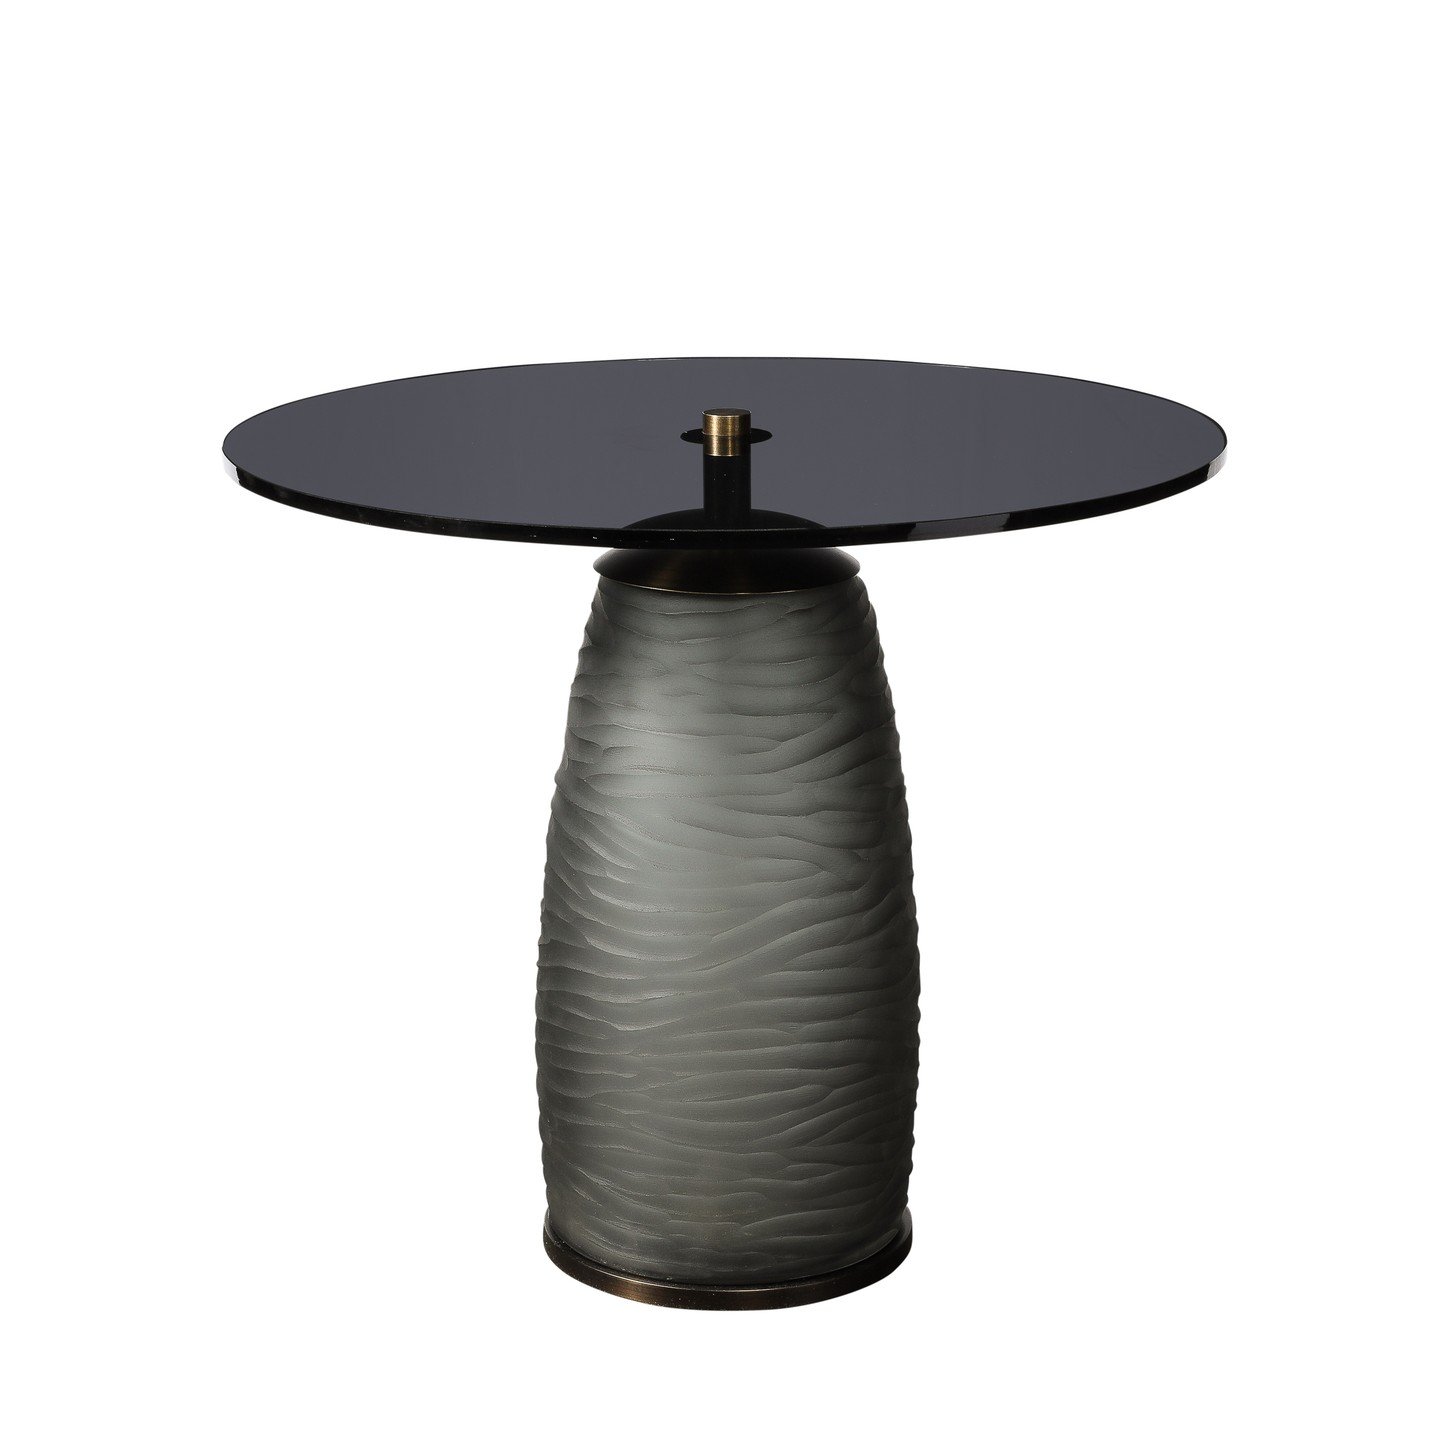 Custom for High Style Deco Murano Smoked Battuto Glass &amp; Bronze End Table

This striking and materially exquisite Modernist Hand-Blown Murano Smoked Battuto Glass Side/End Table with Oil Rubbed Bronze Fittings is Custom for High Style Deco and or